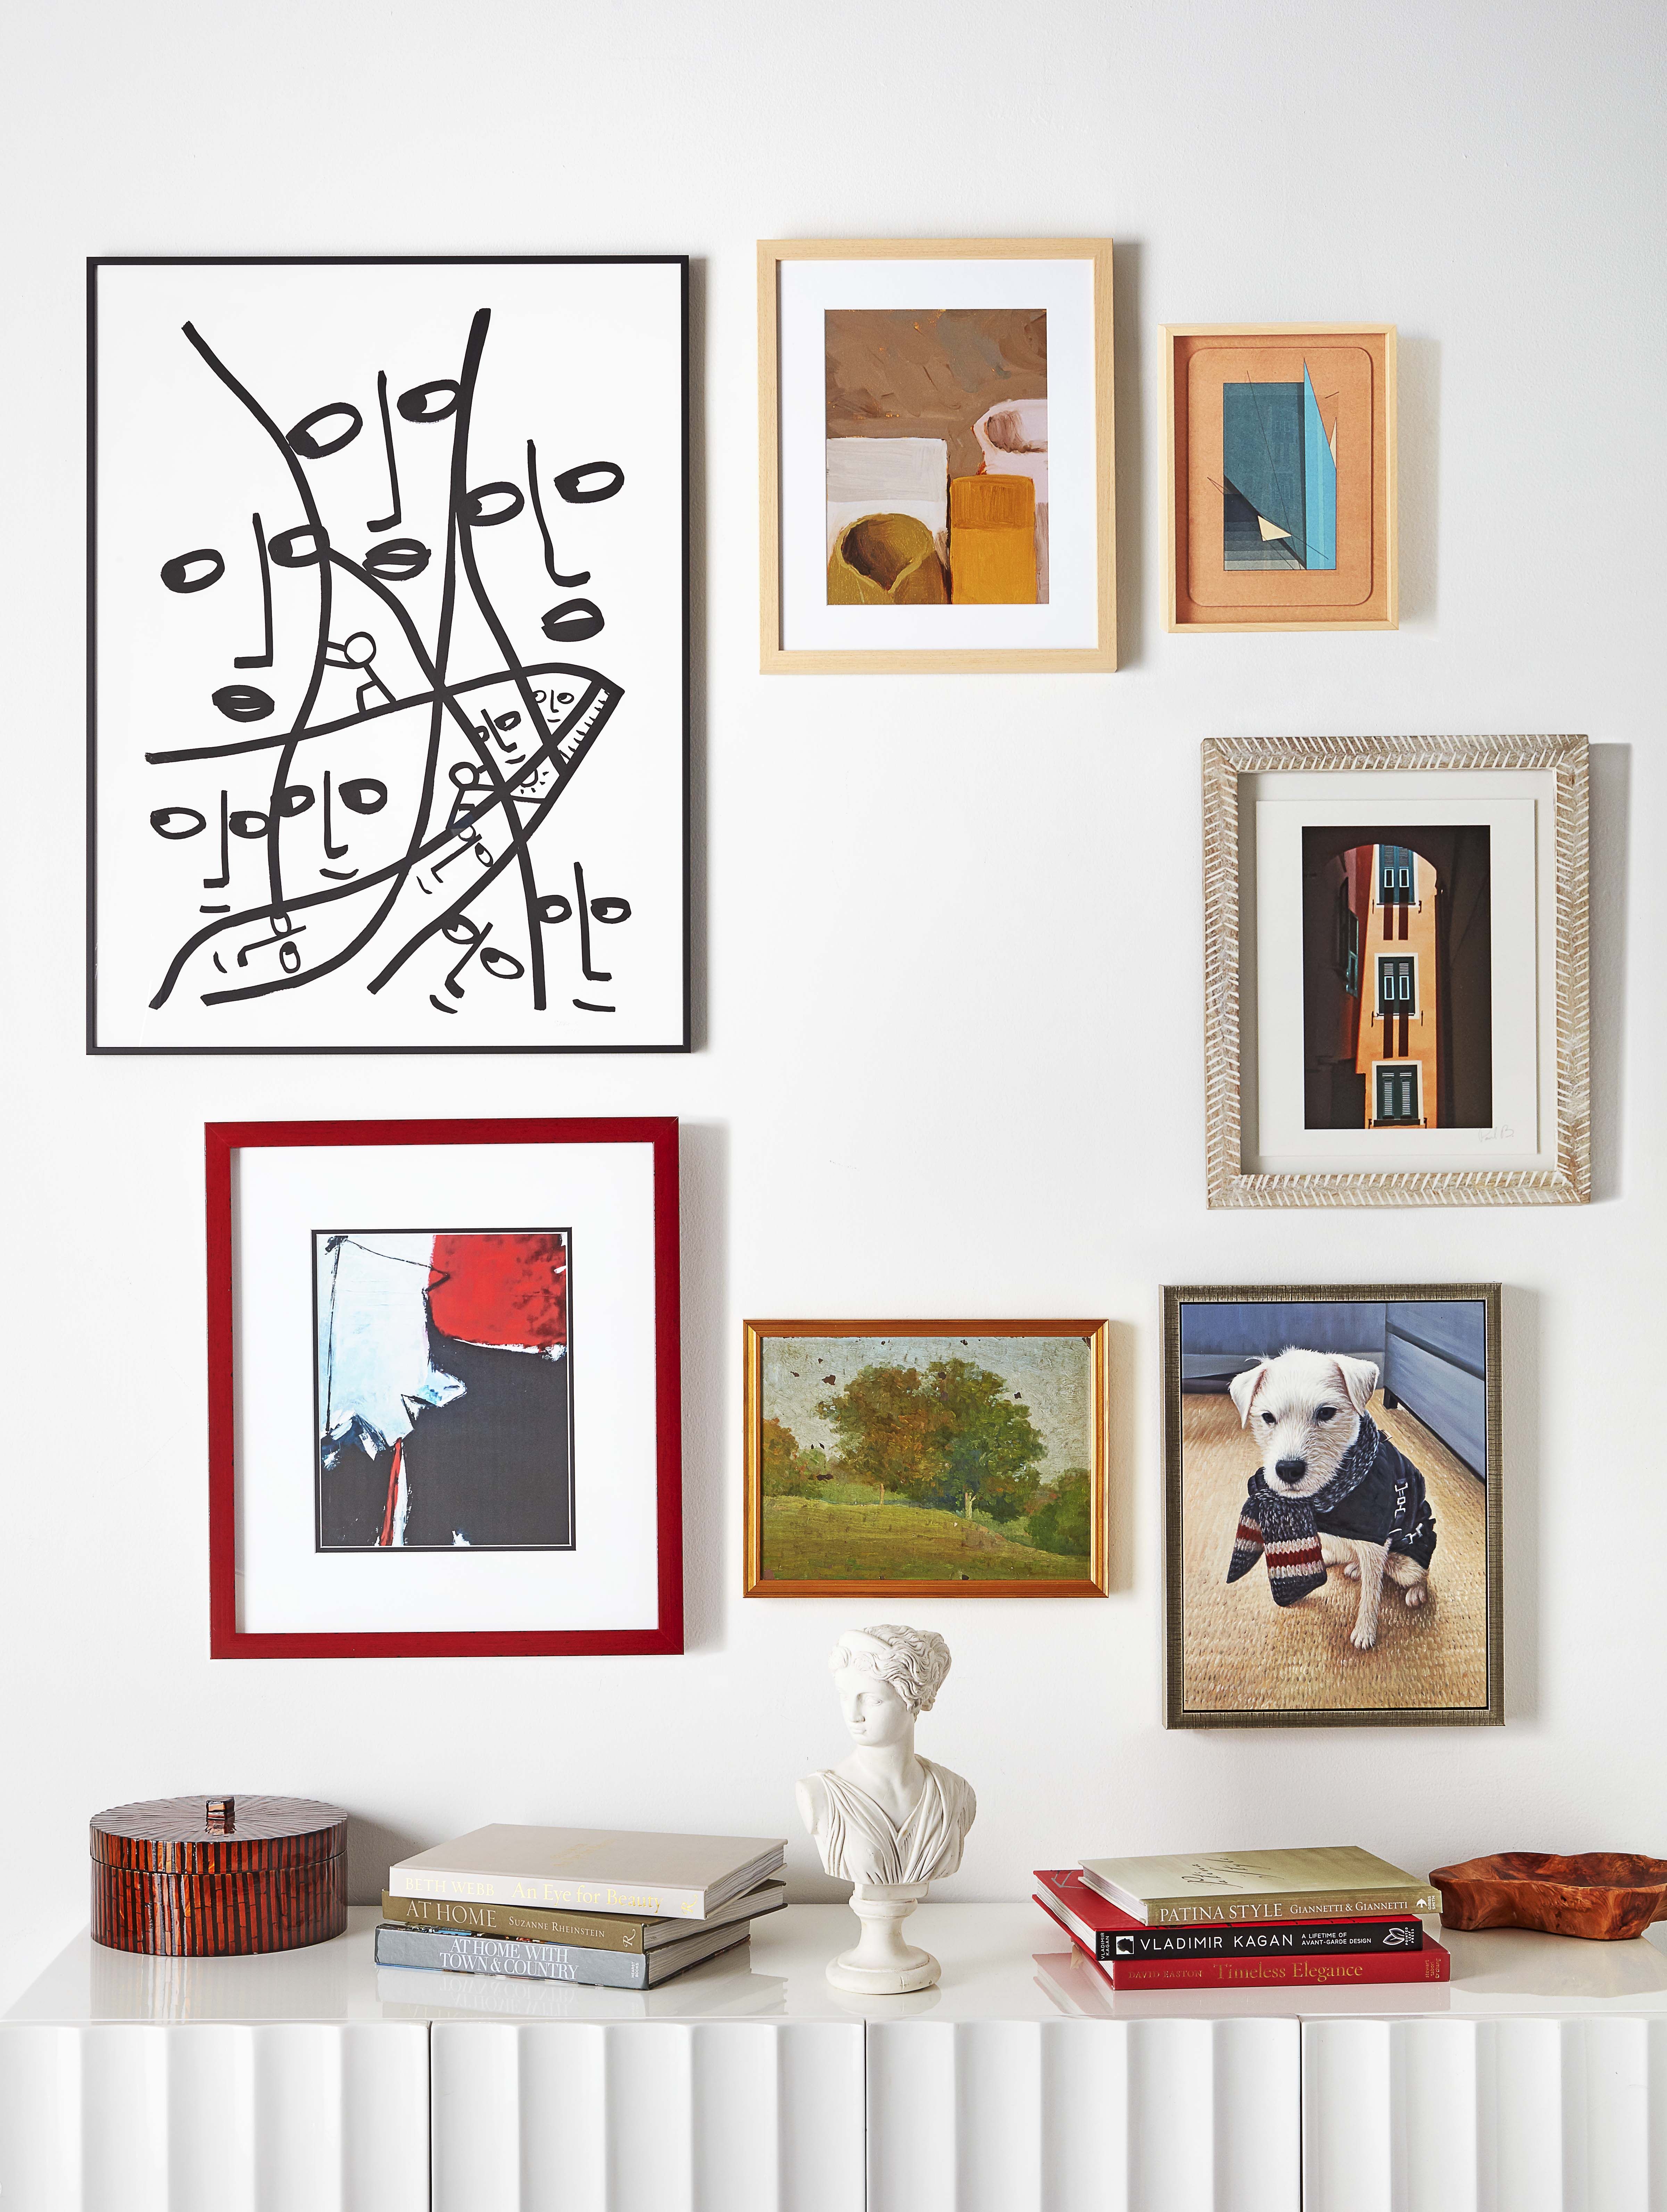 where can you buy picture frames